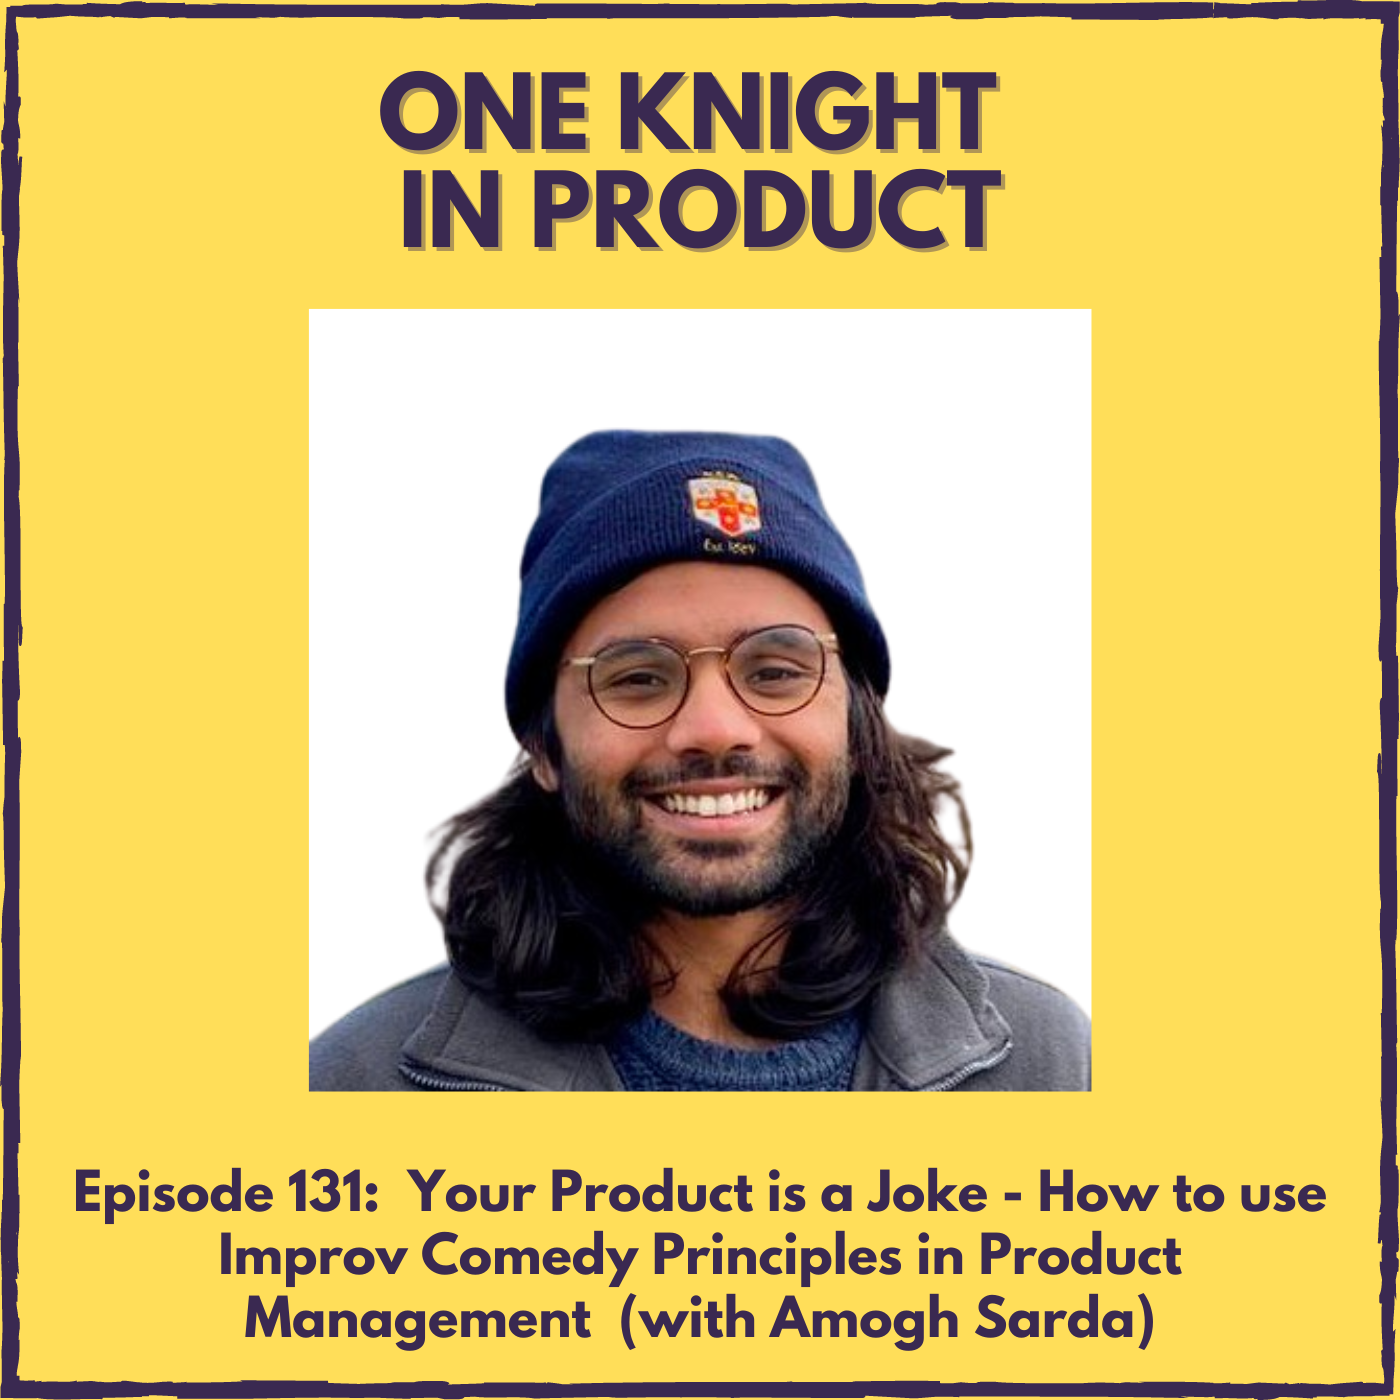 Your Product is a Joke - How to use Improv Comedy Principles in Product Management (with Amogh Sarda, Co-founder @ Eesel)